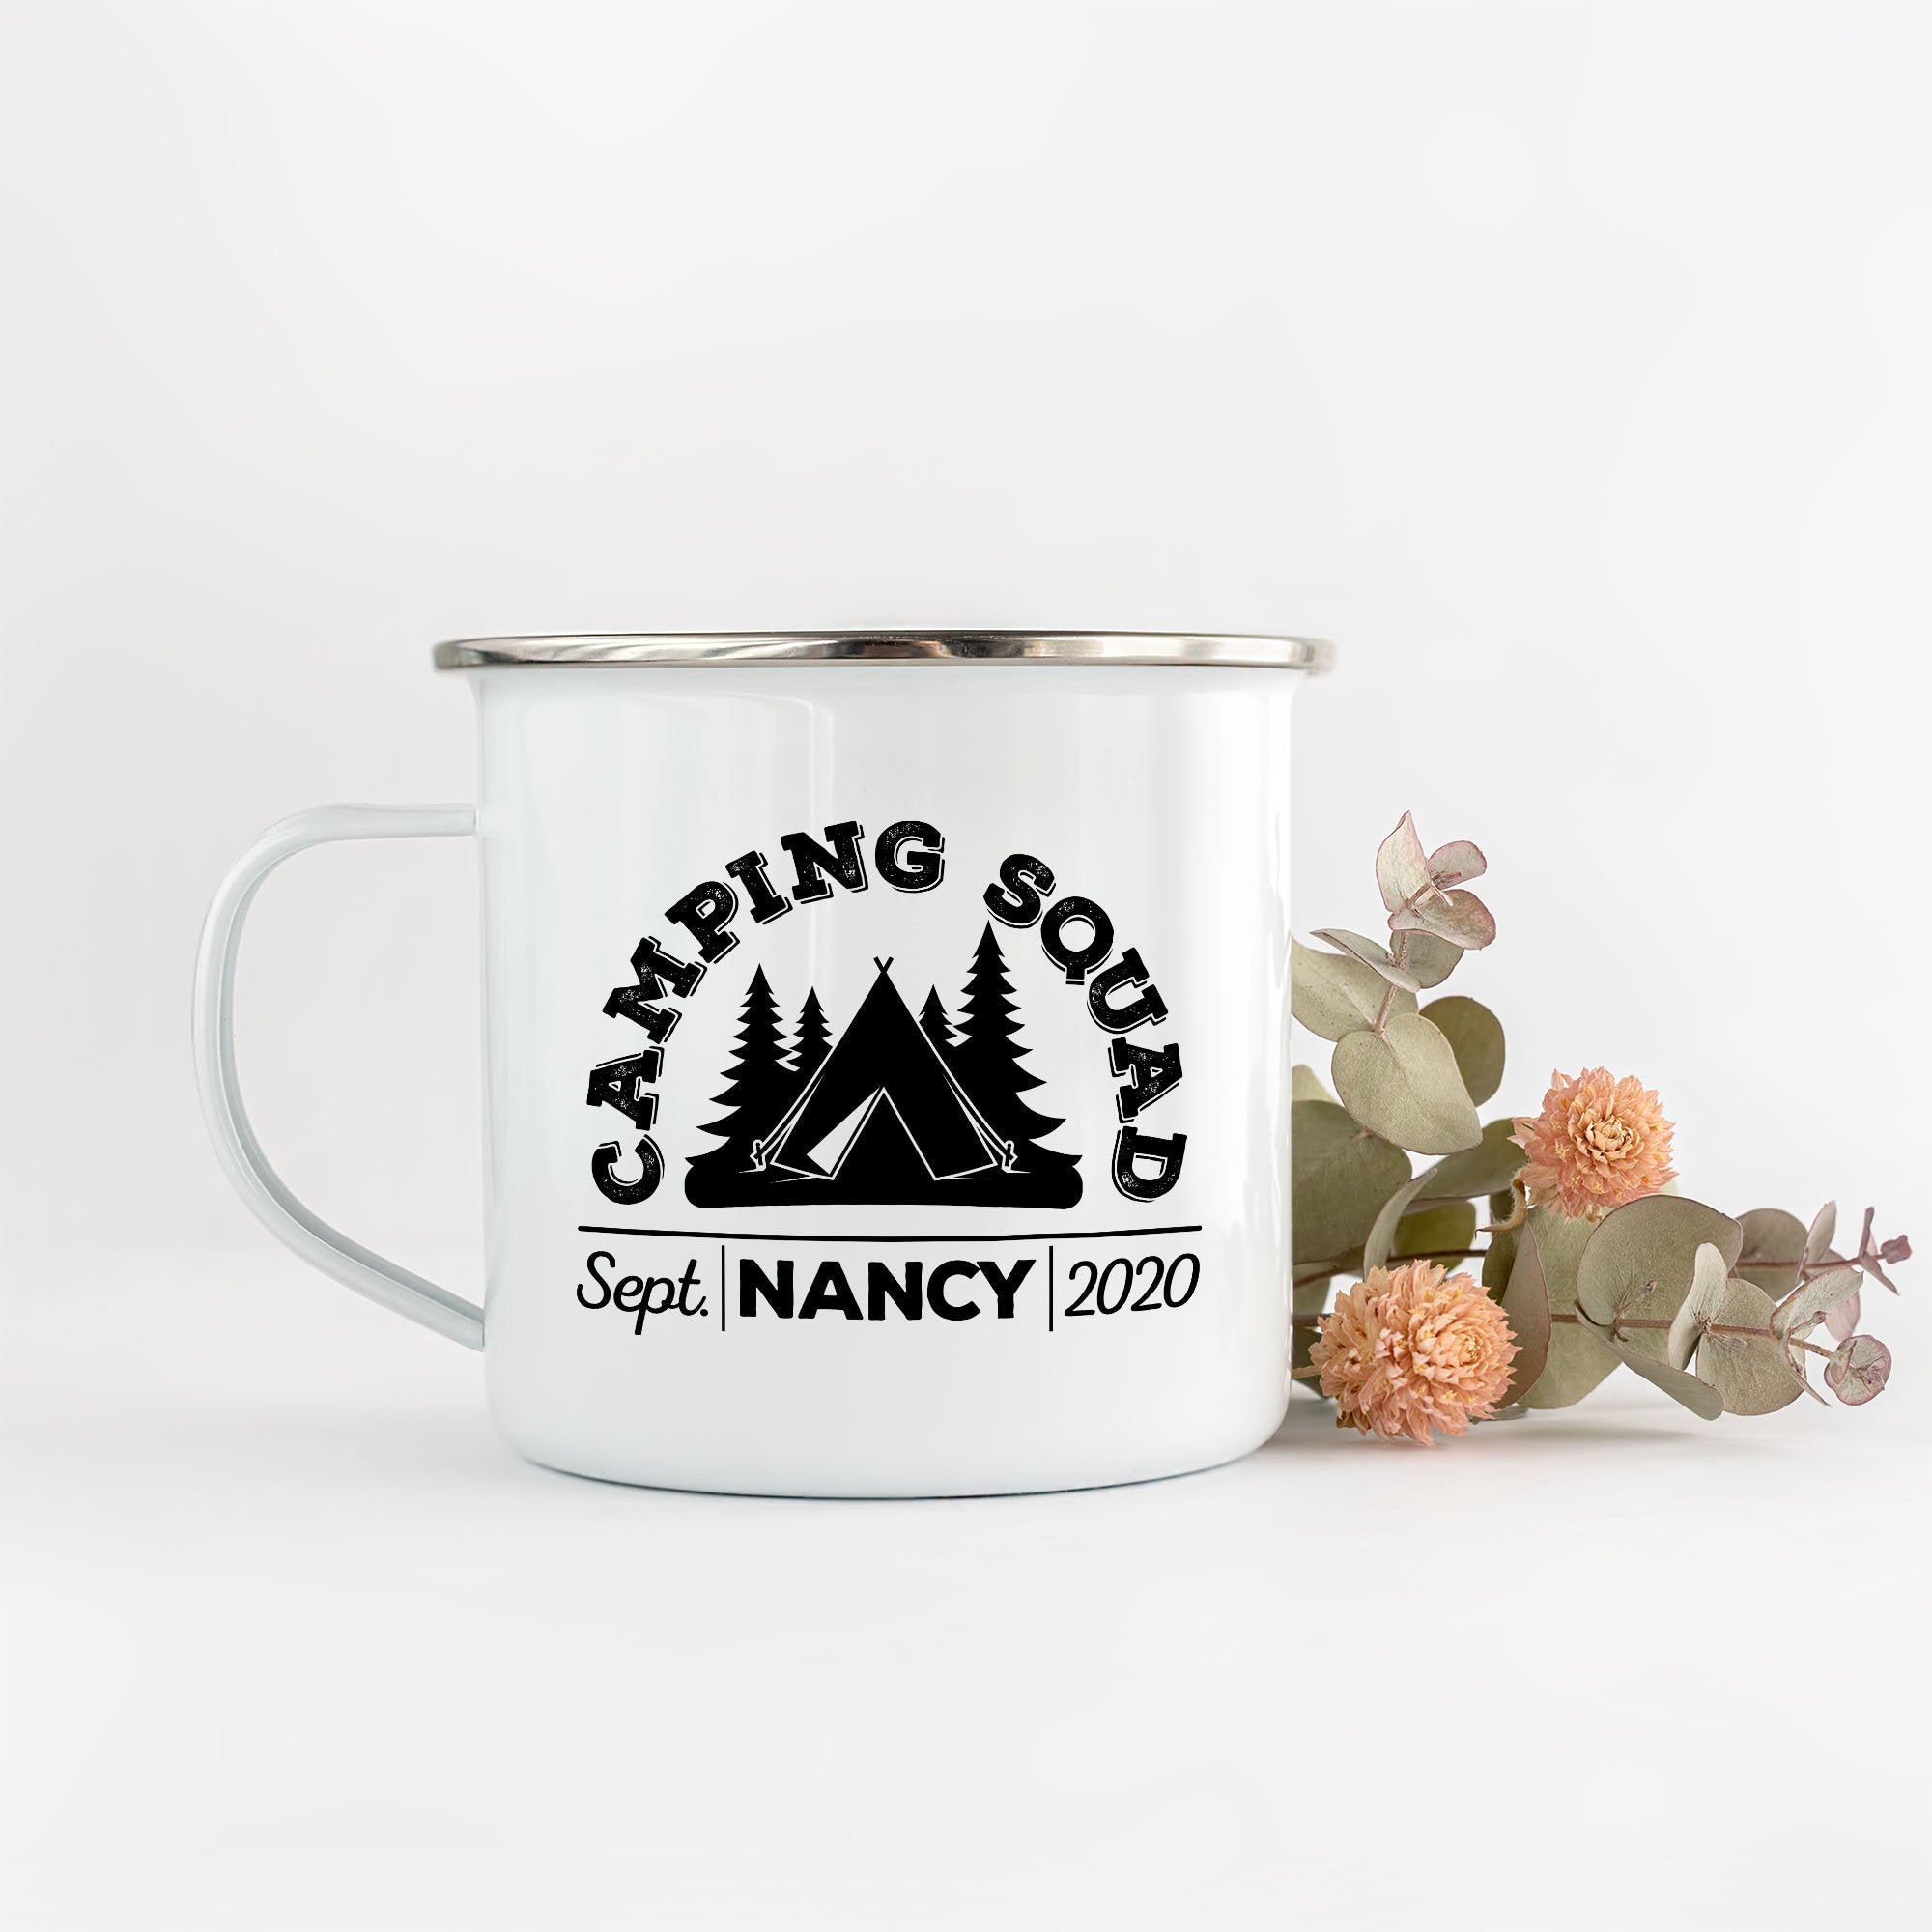 Personalised camping squad mug with name and camp date, Camping gift